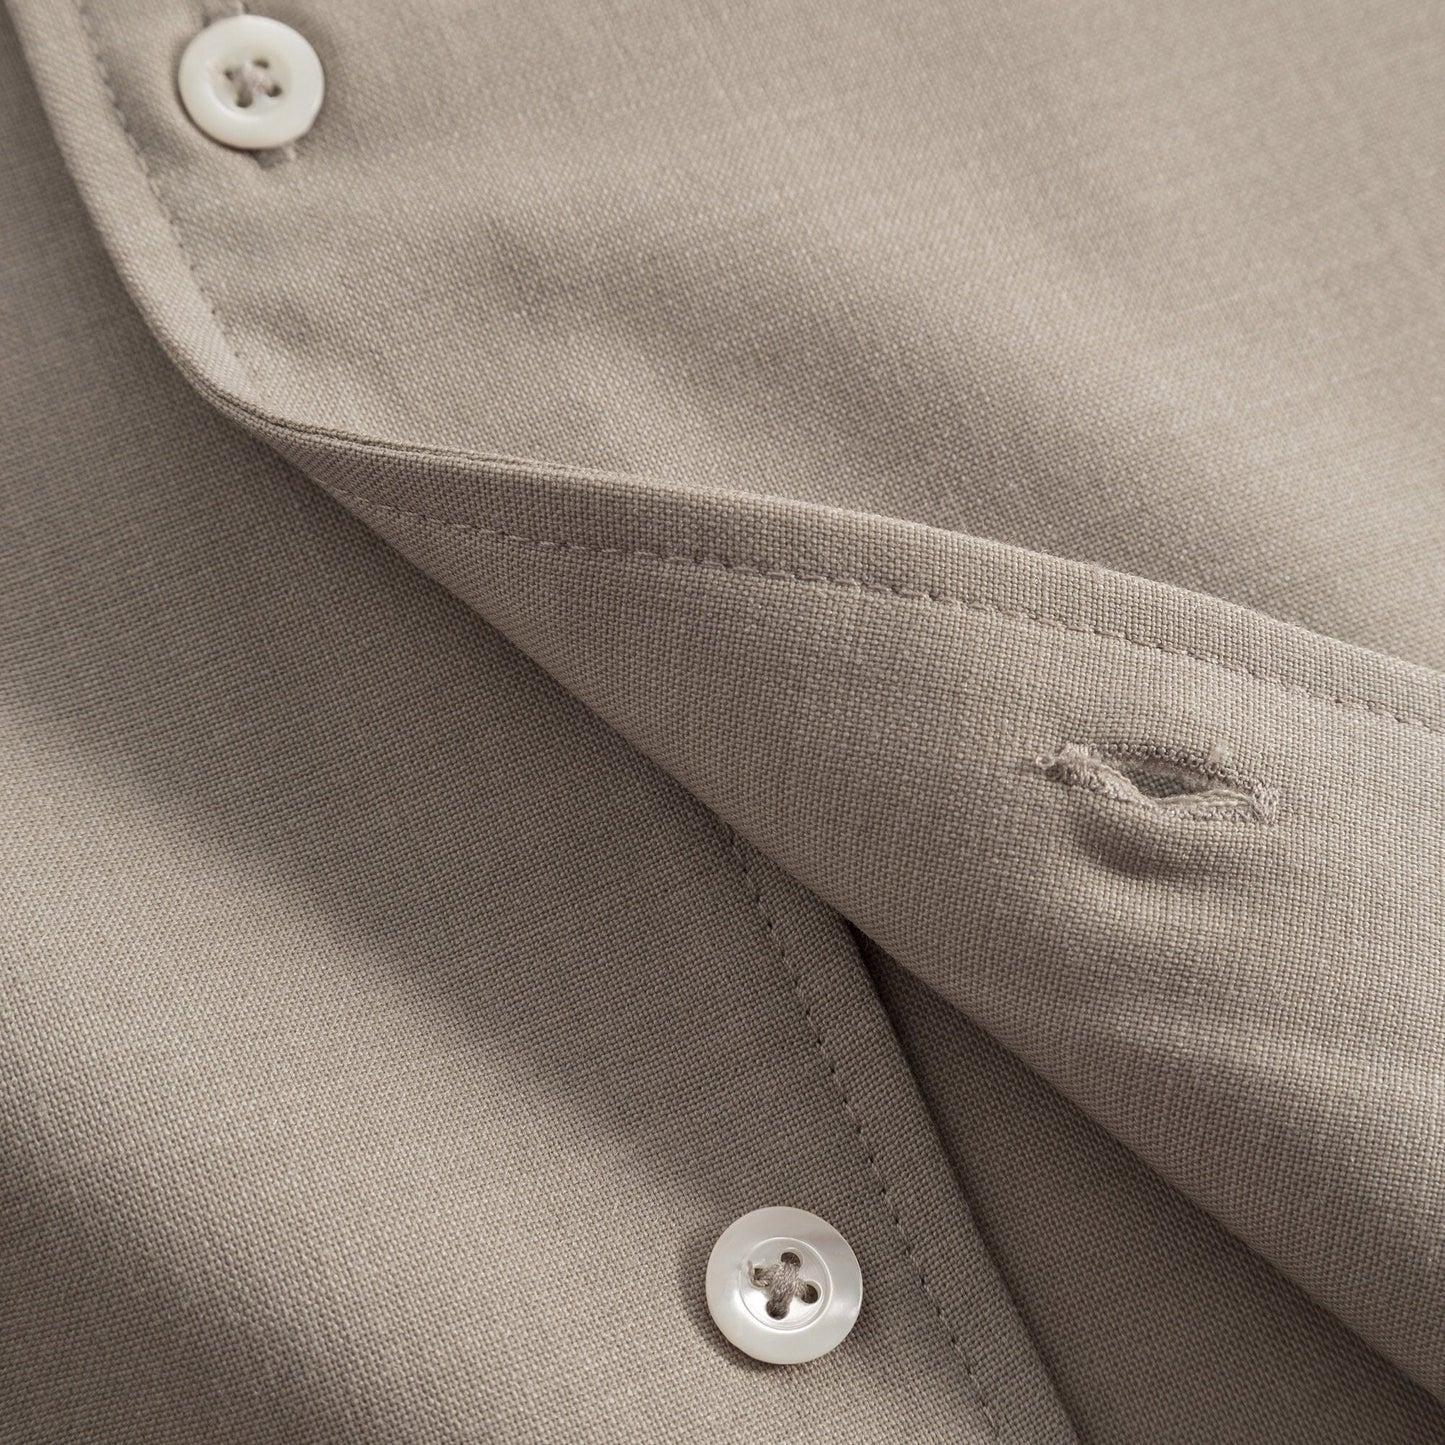 Norse Projects Carsten LS Shirt - Light Khaki Shirt Norse Projects 